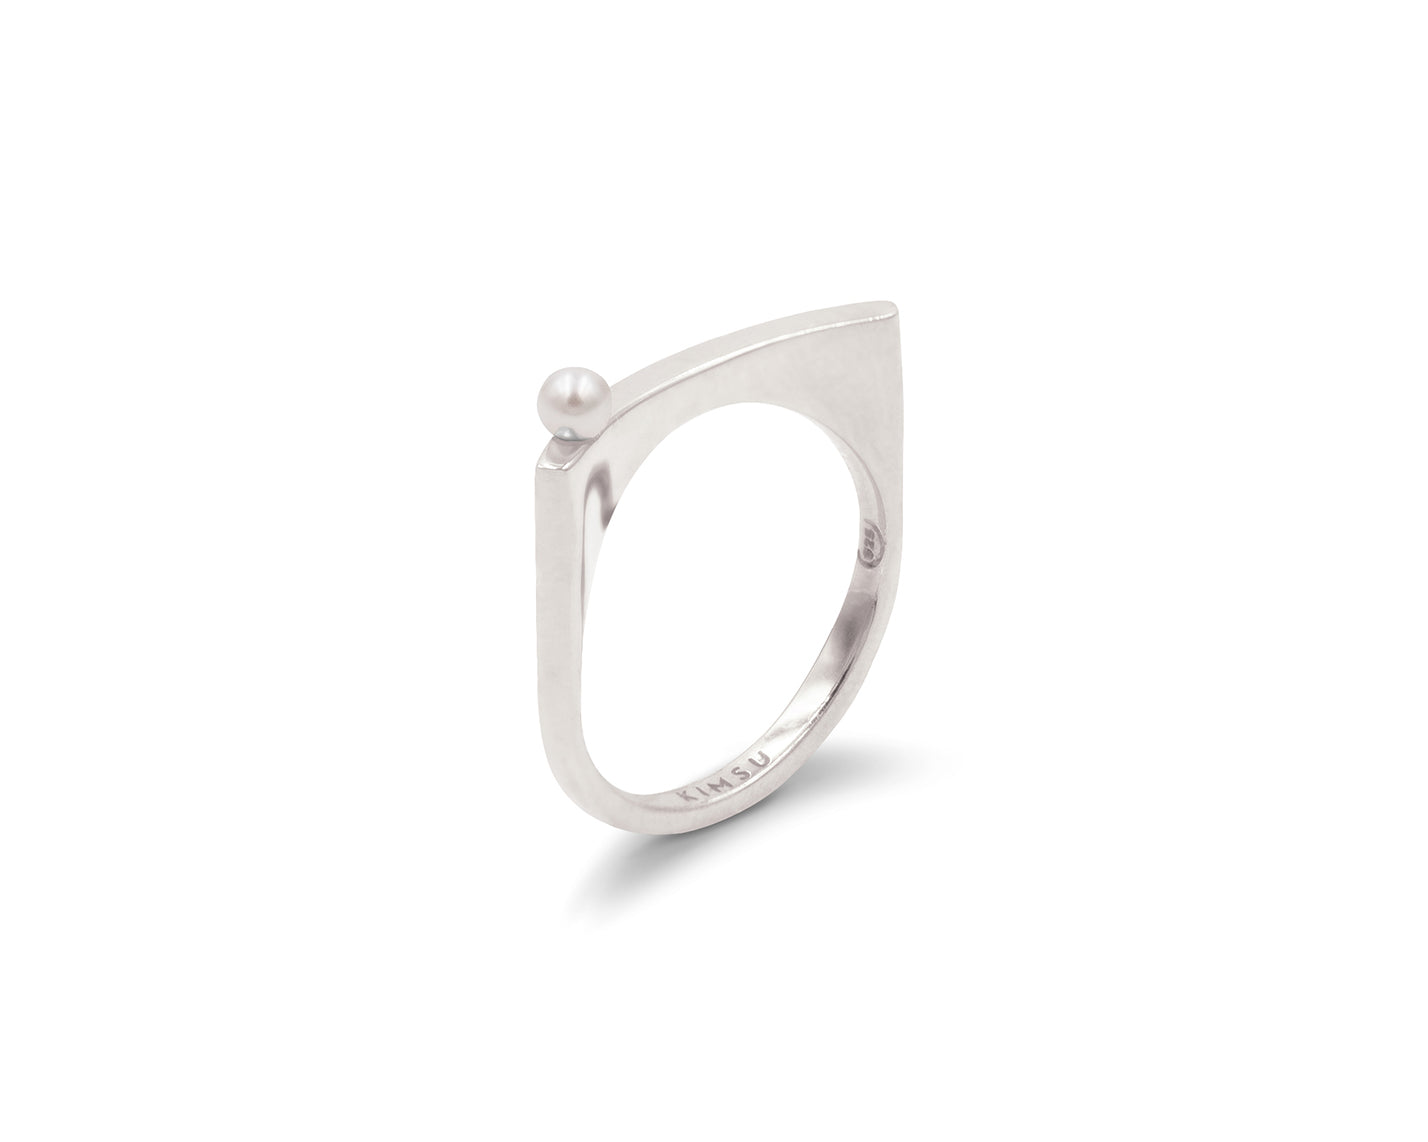 Corky Ring Silver